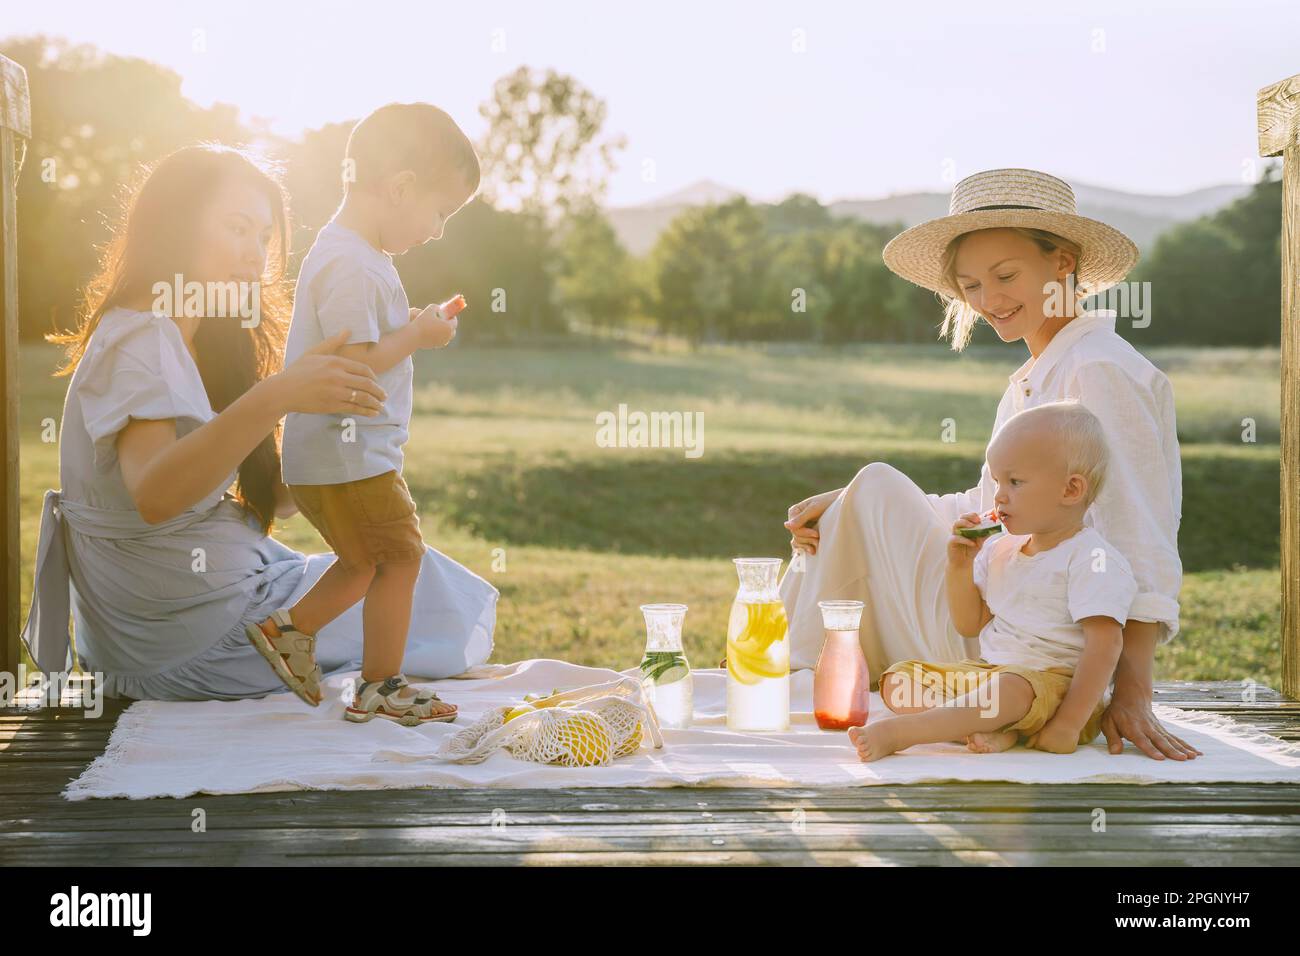 Women spending time together with sons at picnic Stock Photo